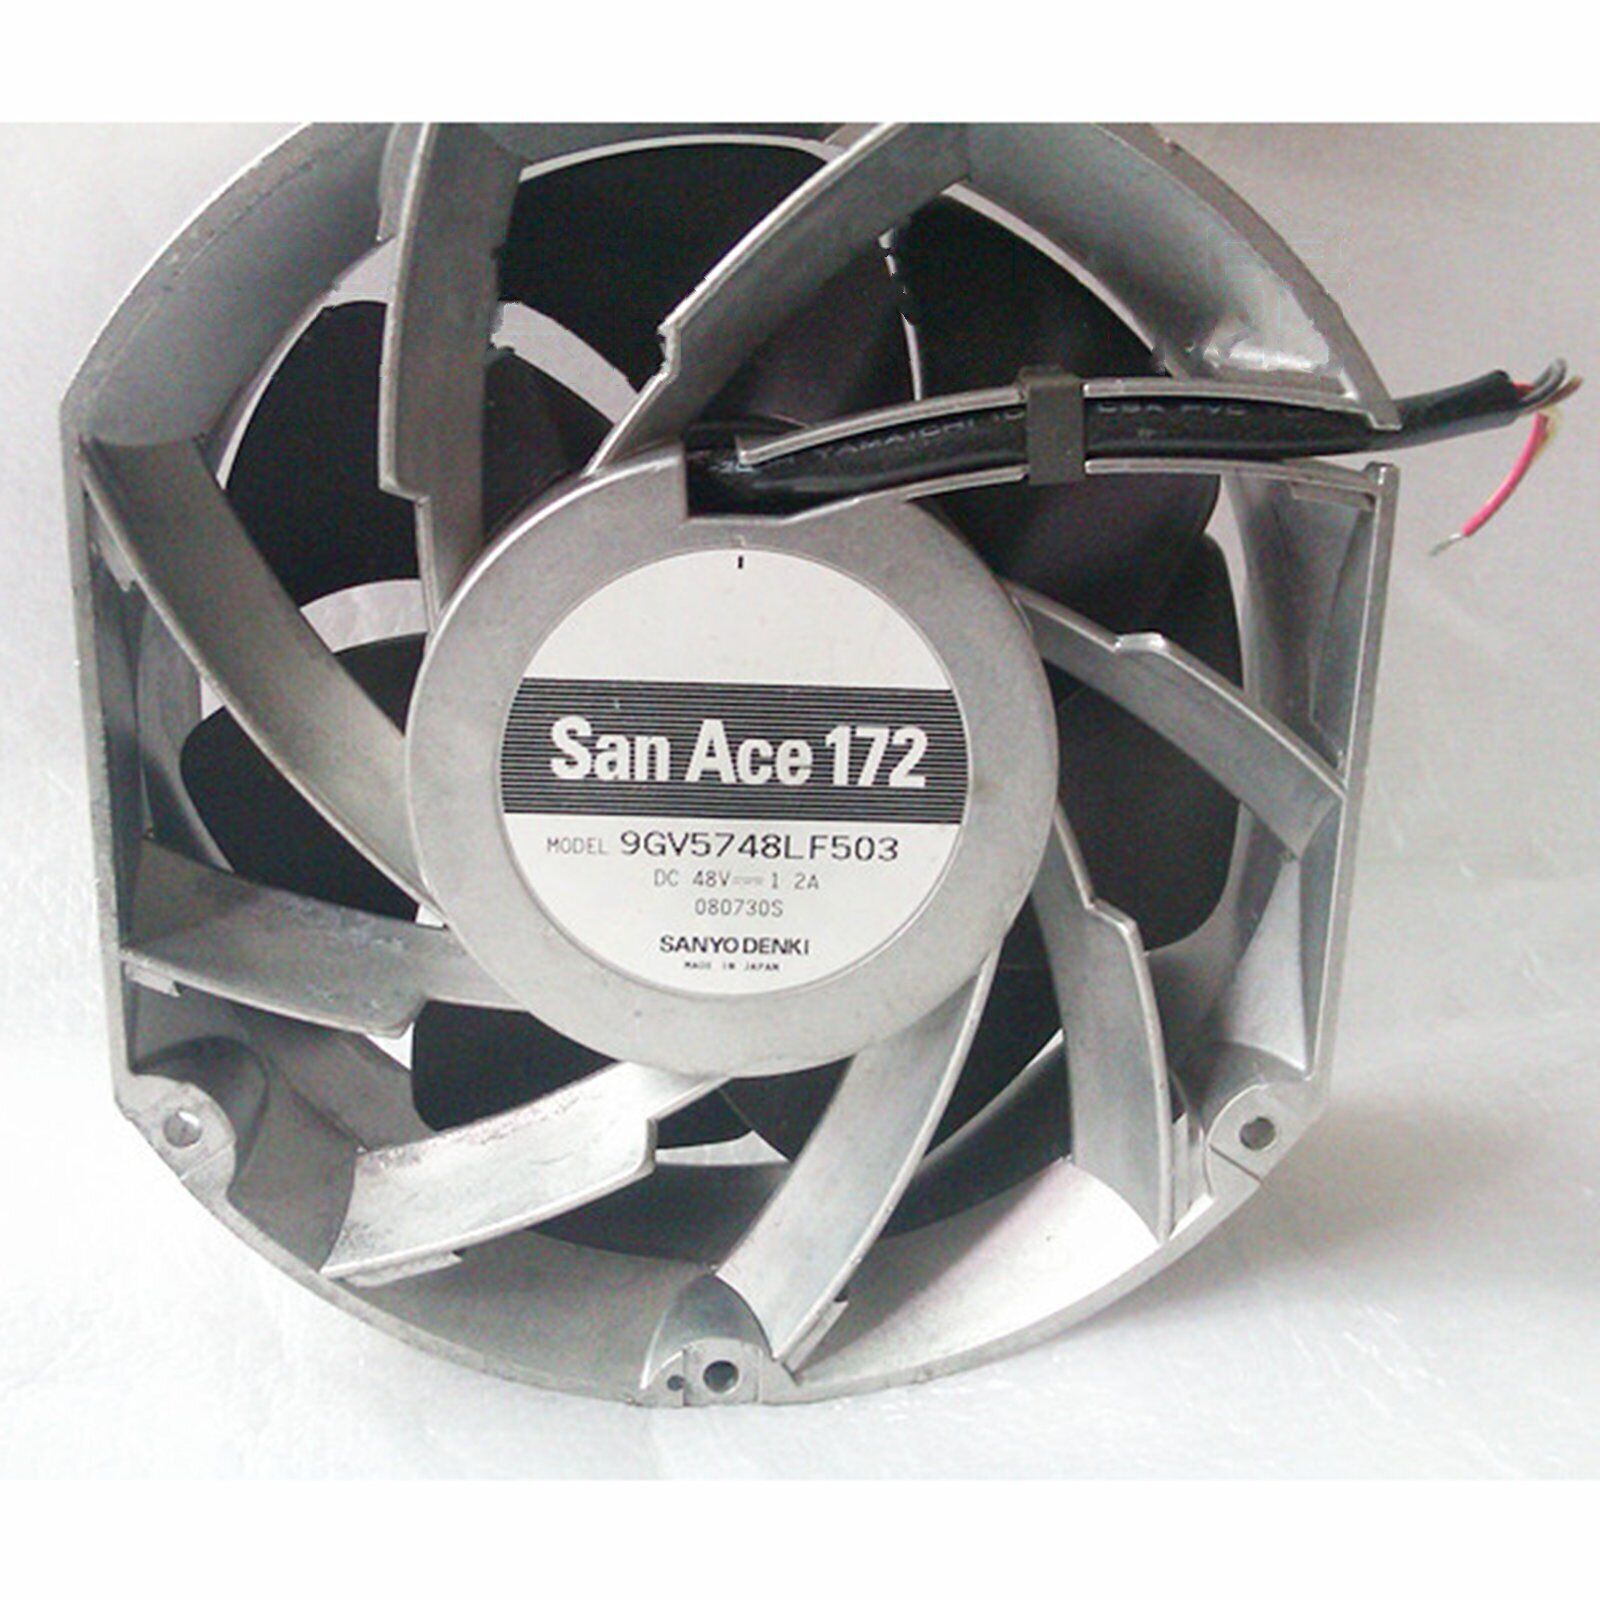 1PC For  San Ace 172 New cooling fan 9GV5748LF503 48V 1.2A 